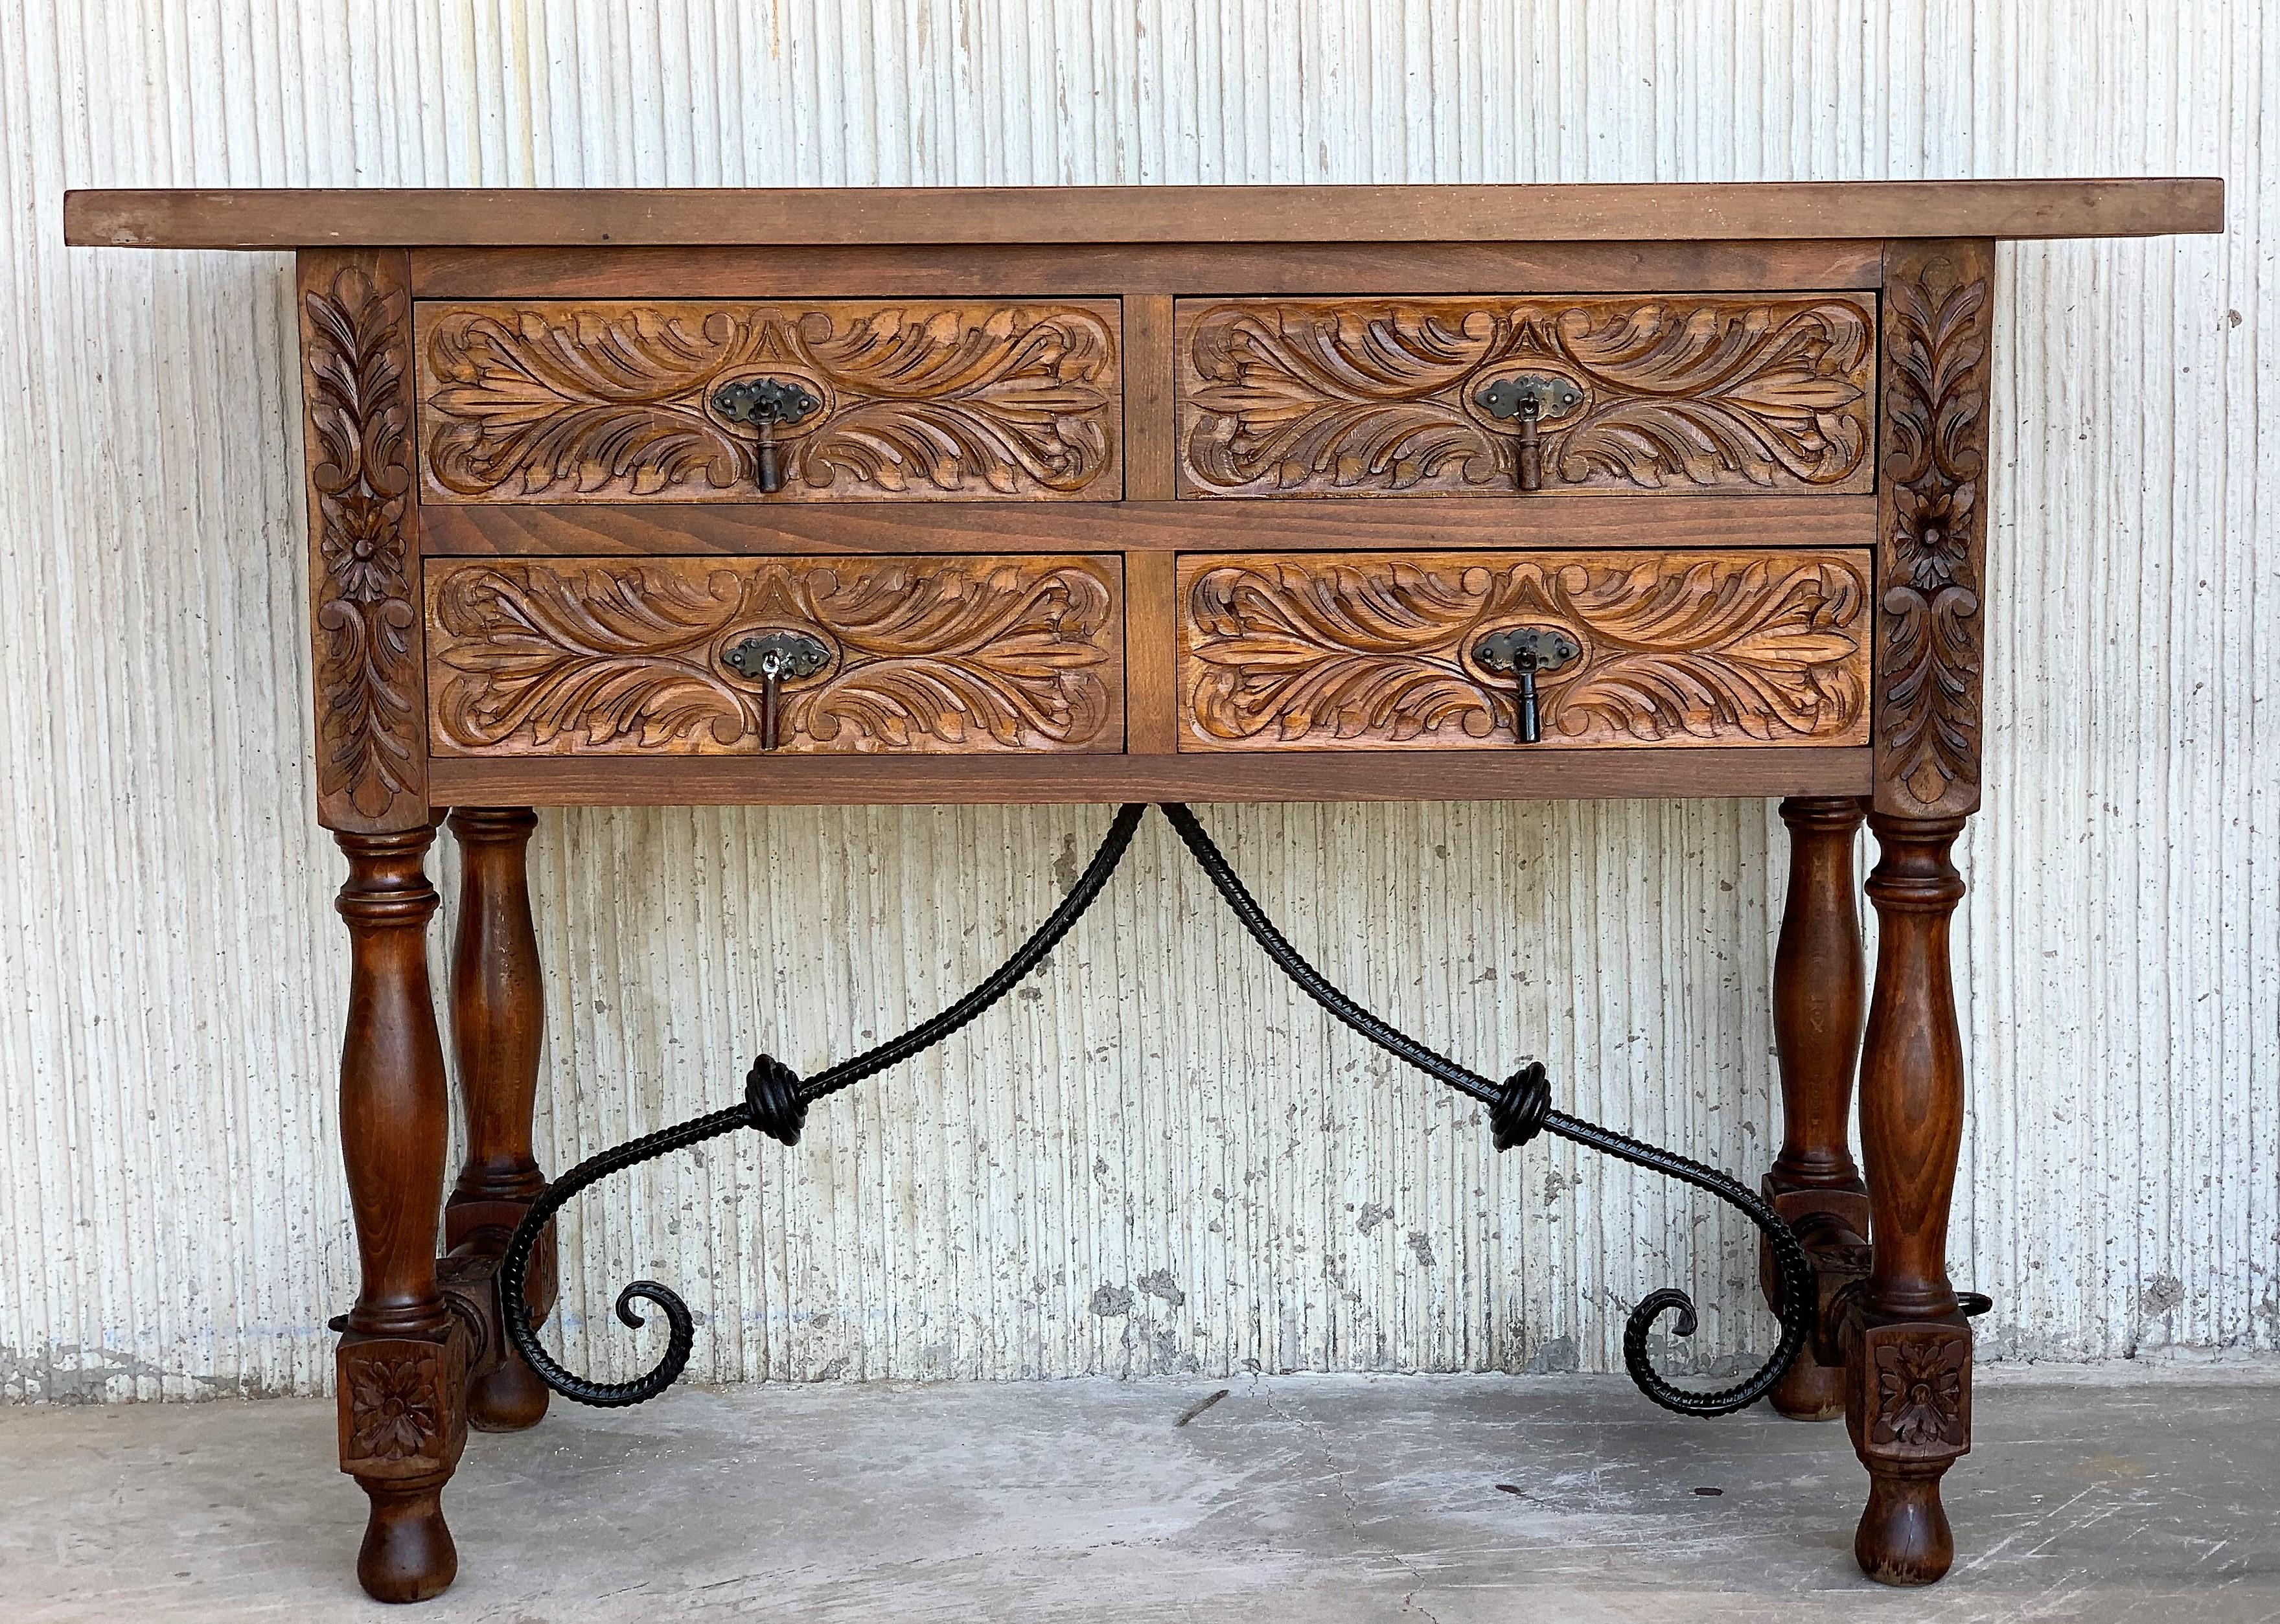 20th century Spanish carved walnut console sofa table with four drawers and iron stretcher
You can use like a commode or chest of drawers
This elegant antique walnut console was crafted in spain, circa 1900. The sofa table with four legs and